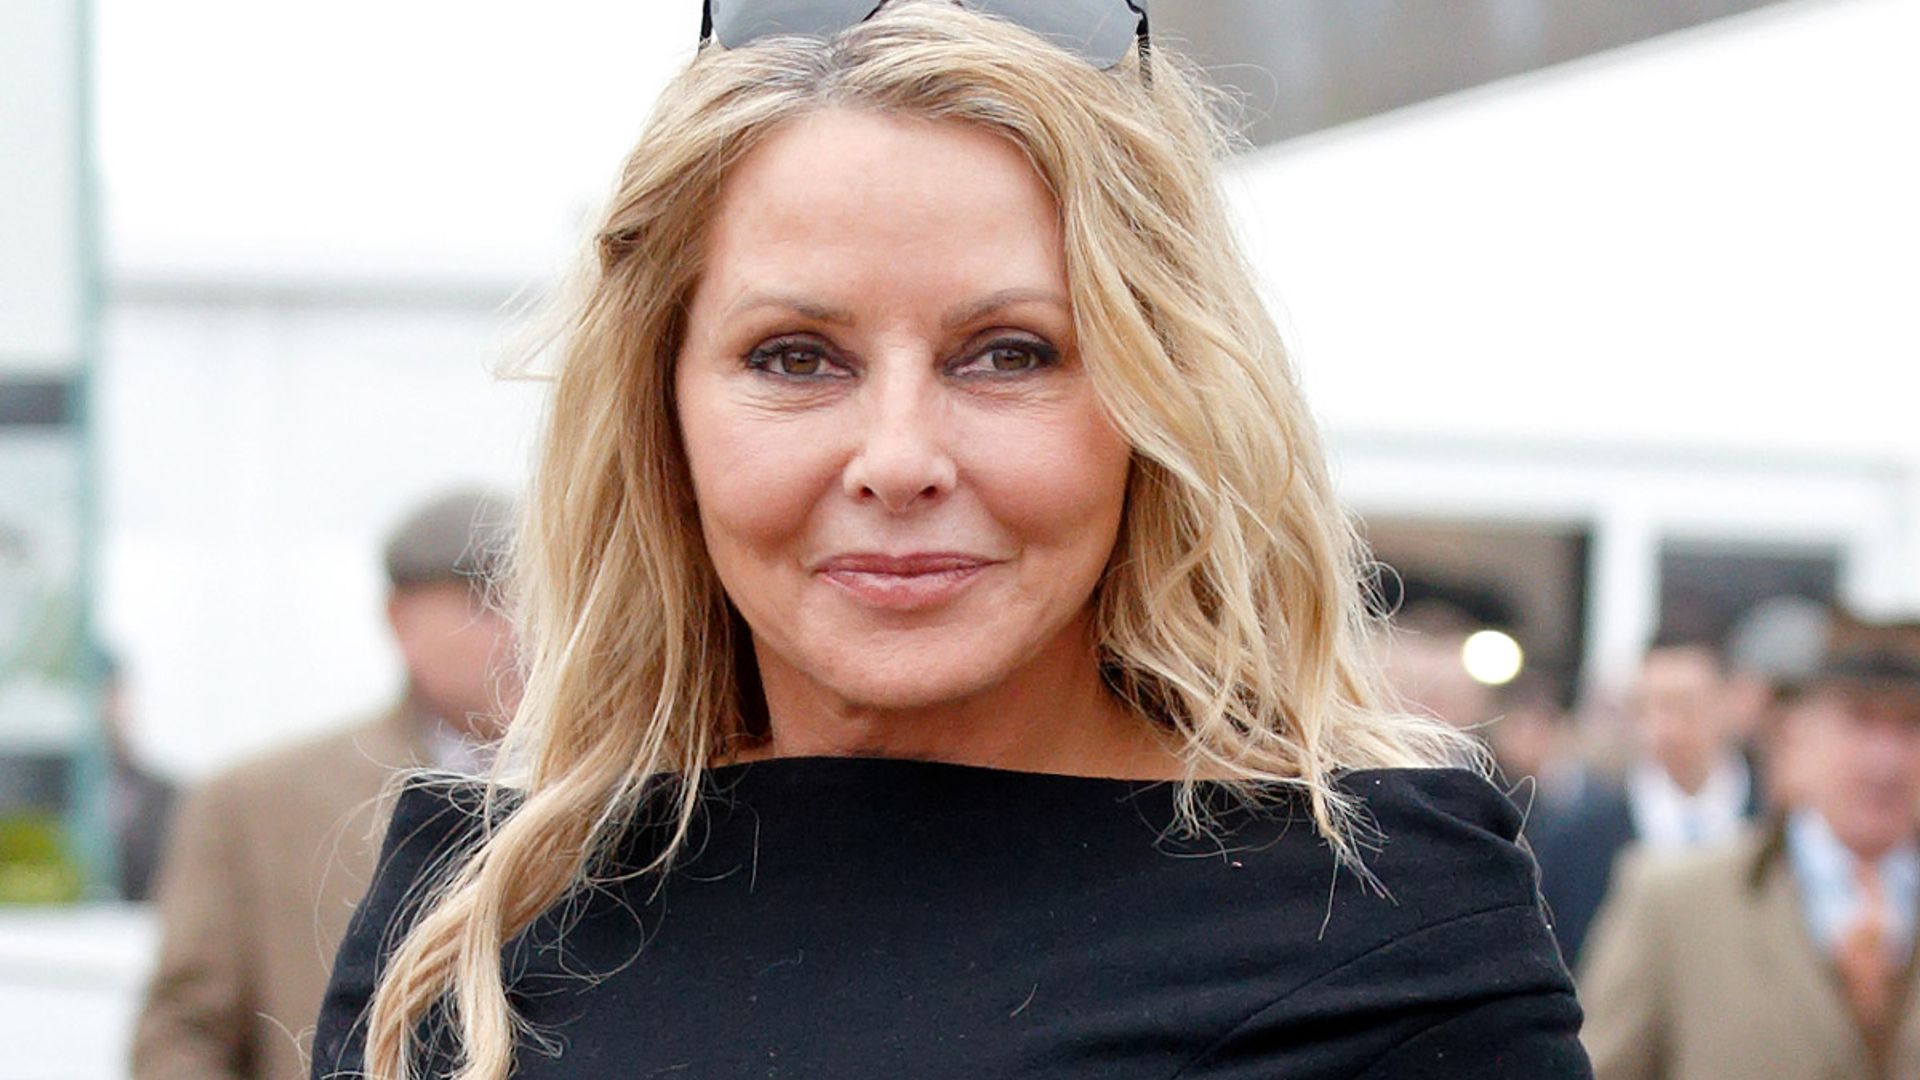 Carol Vorderman looks unrecognisable in new photo – fans react to 'shocked' star's concern